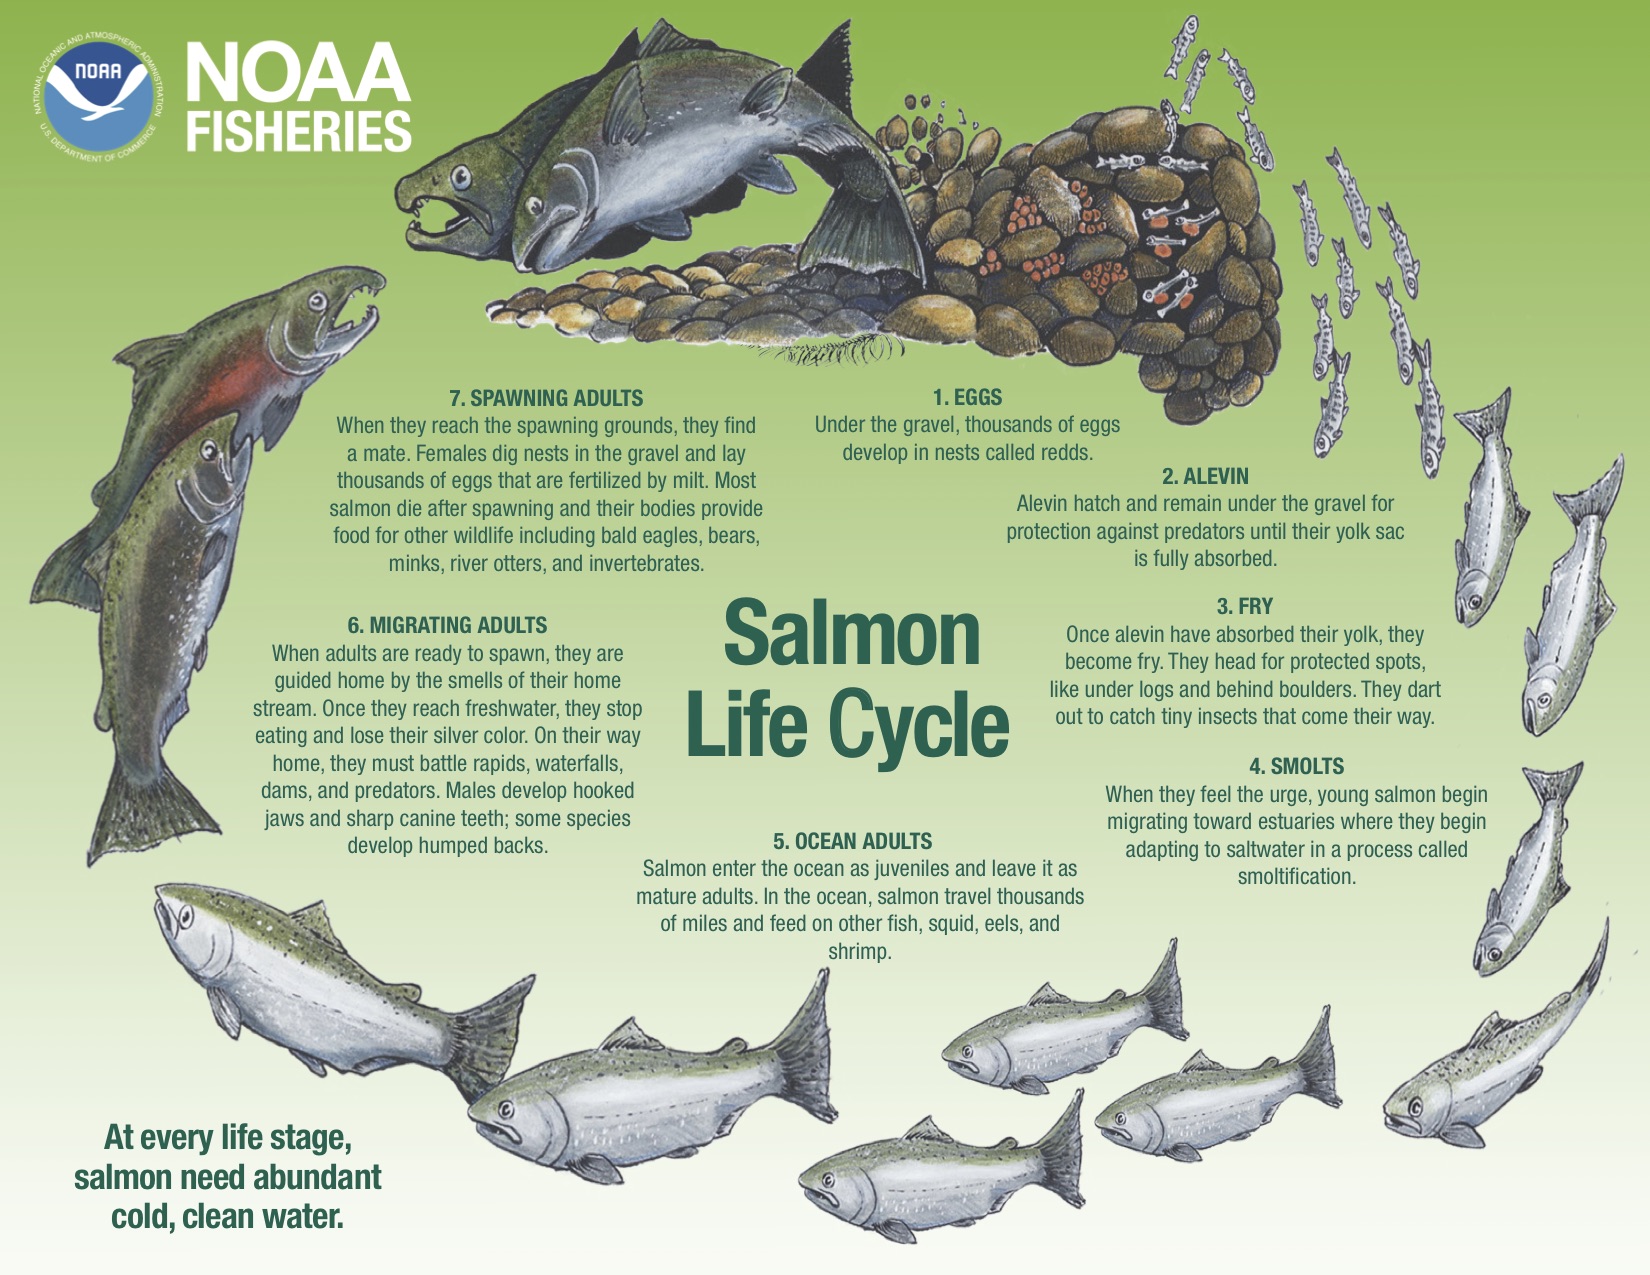 The life cycle of a salmon. 